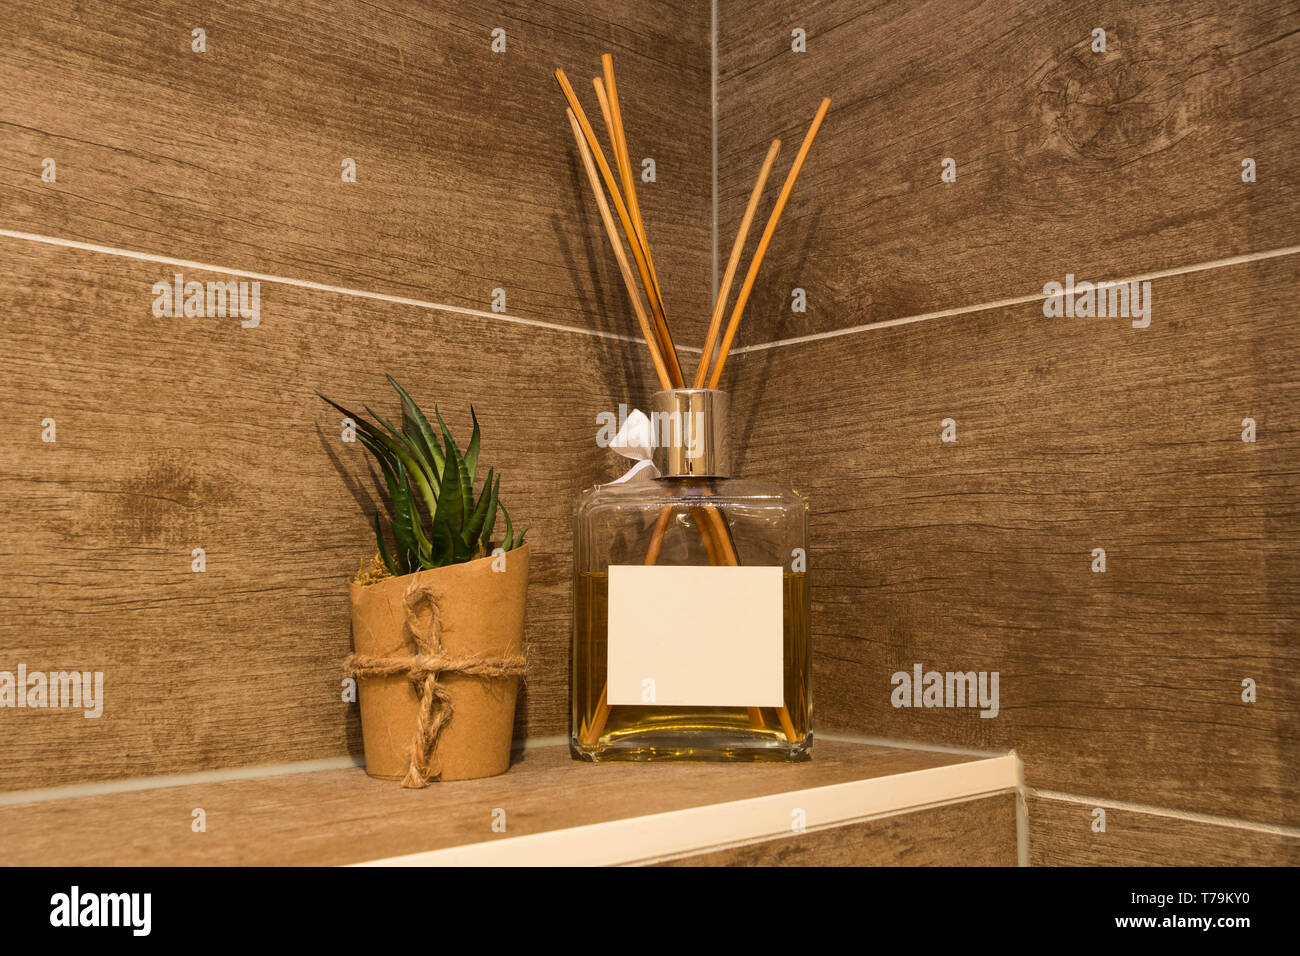 https://c8.alamy.com/compde/t79ky0/air-refresher-flasche-aroma-reed-diffuser-flasche-home-duft-sticks-luxus-close-up-t79ky0.jpg